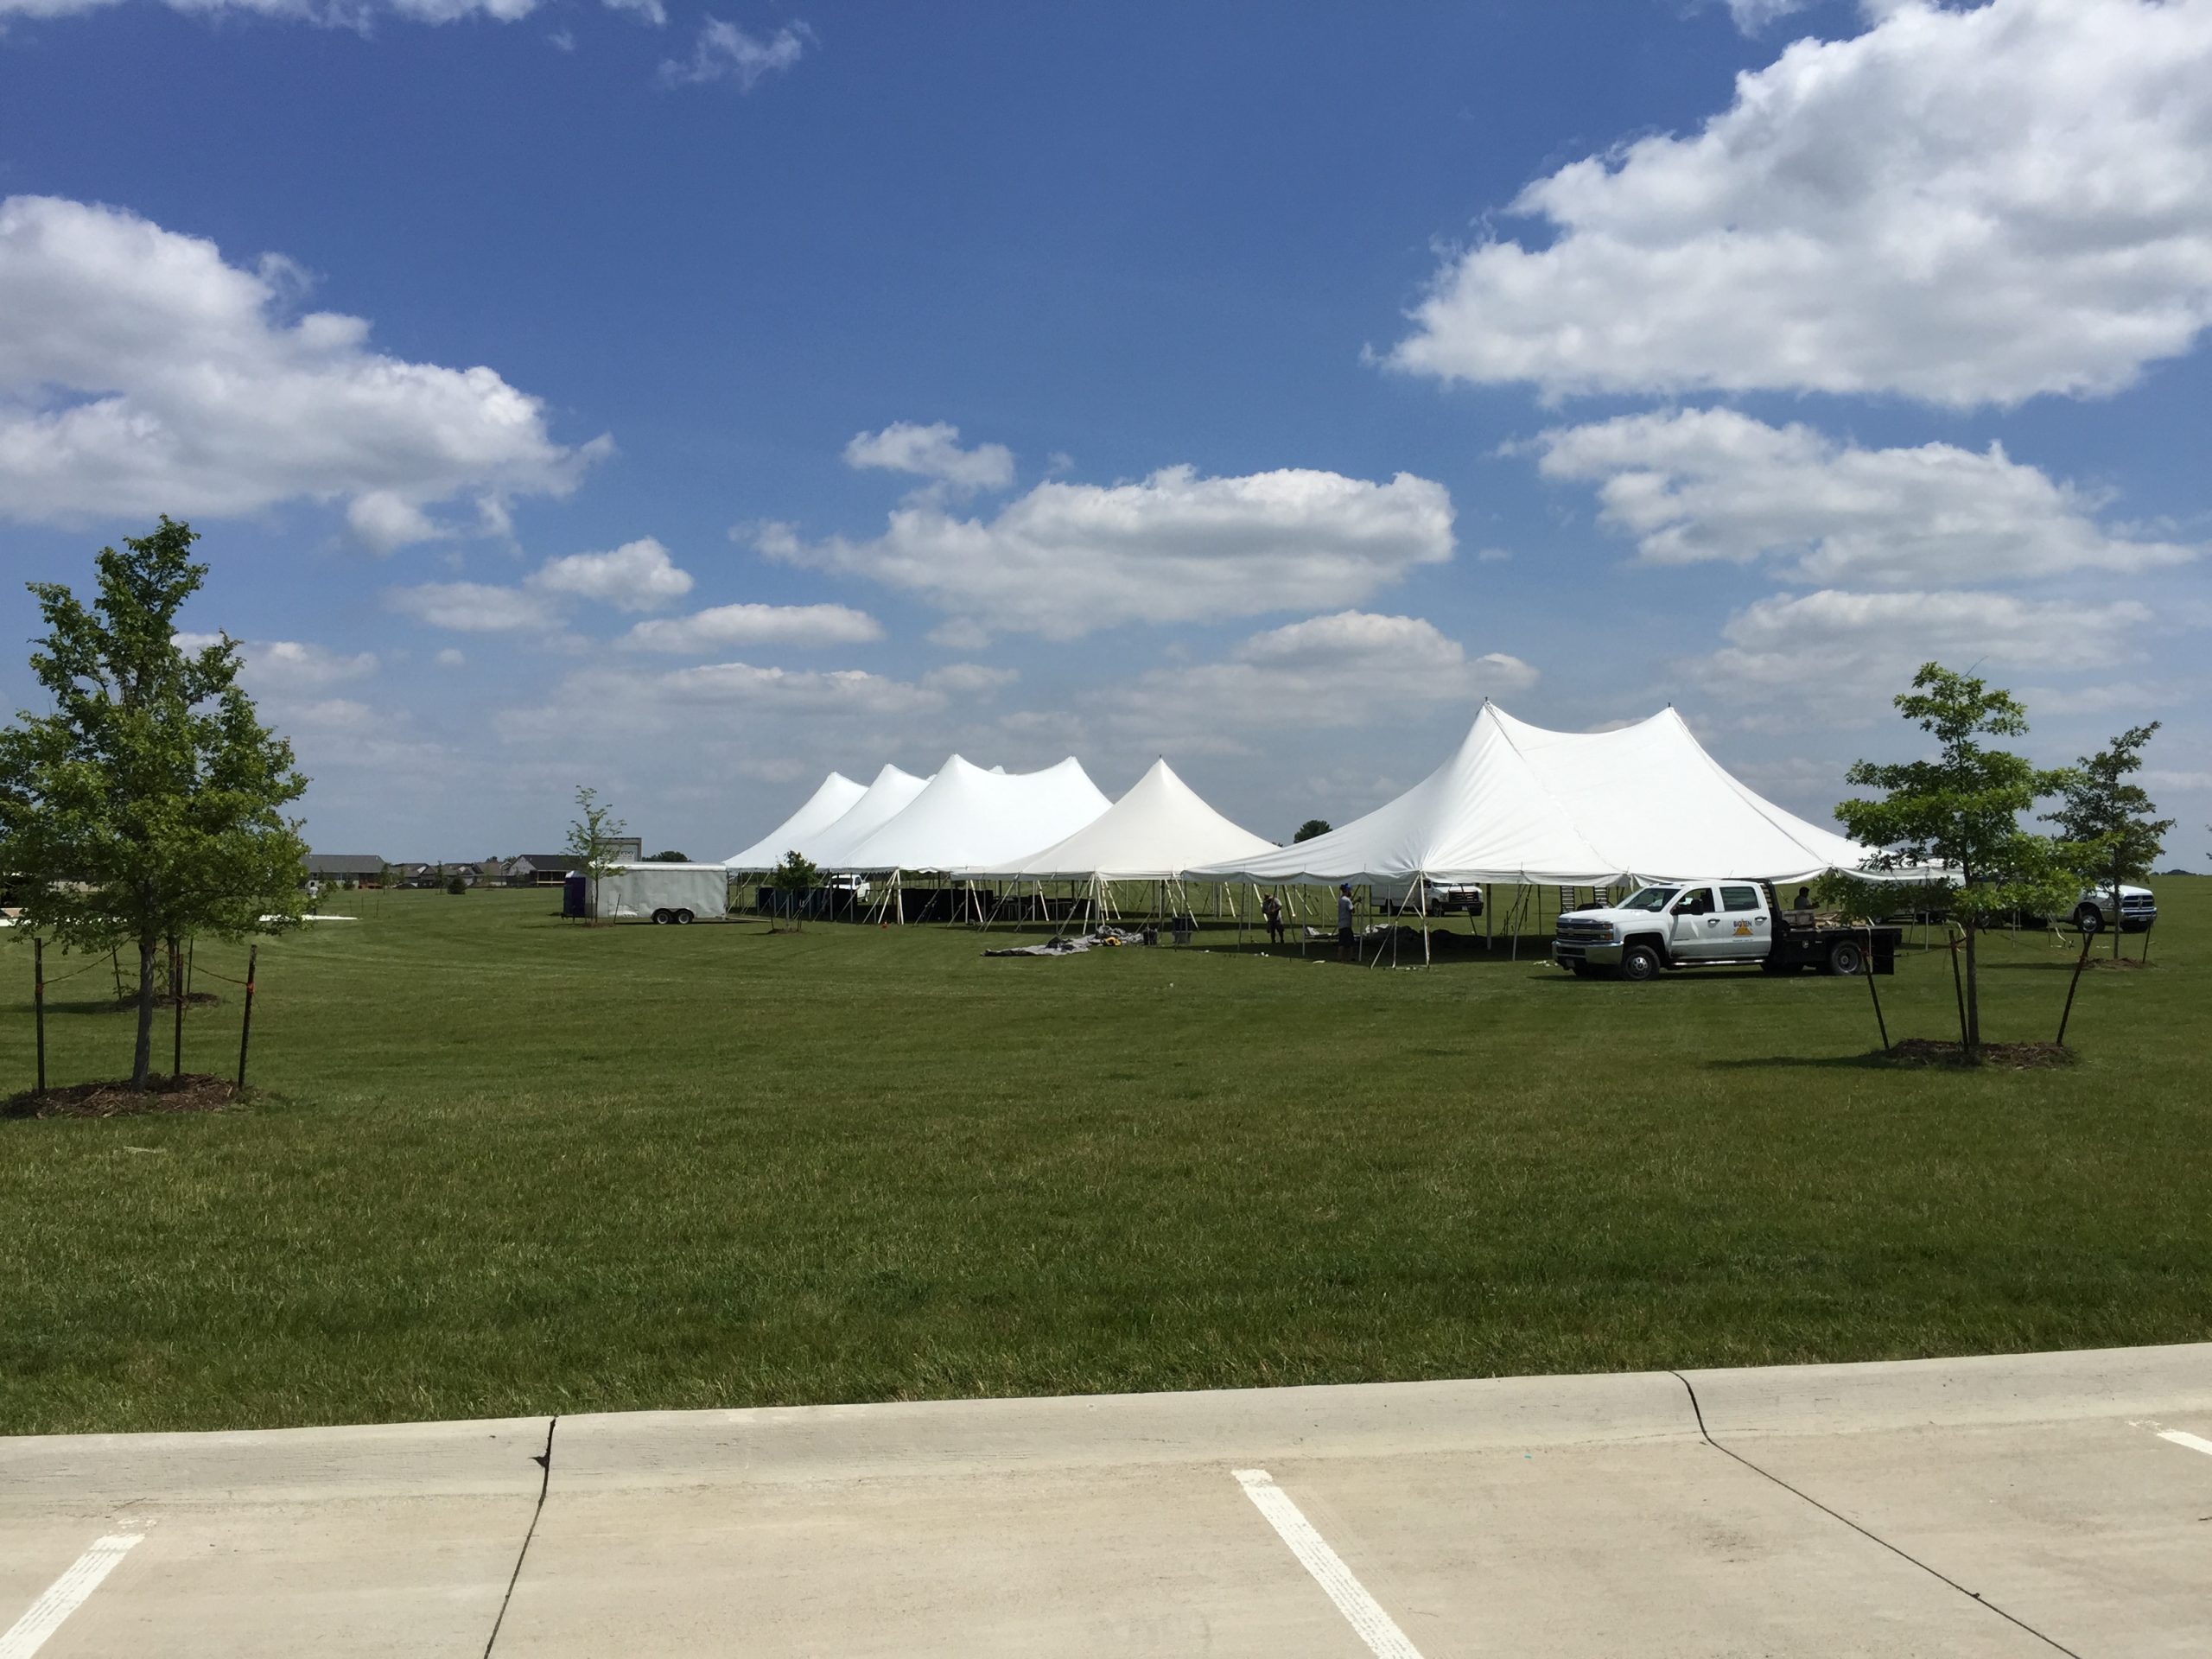 Outdoor festival tent set-up for Blues and BBQ in Iowa